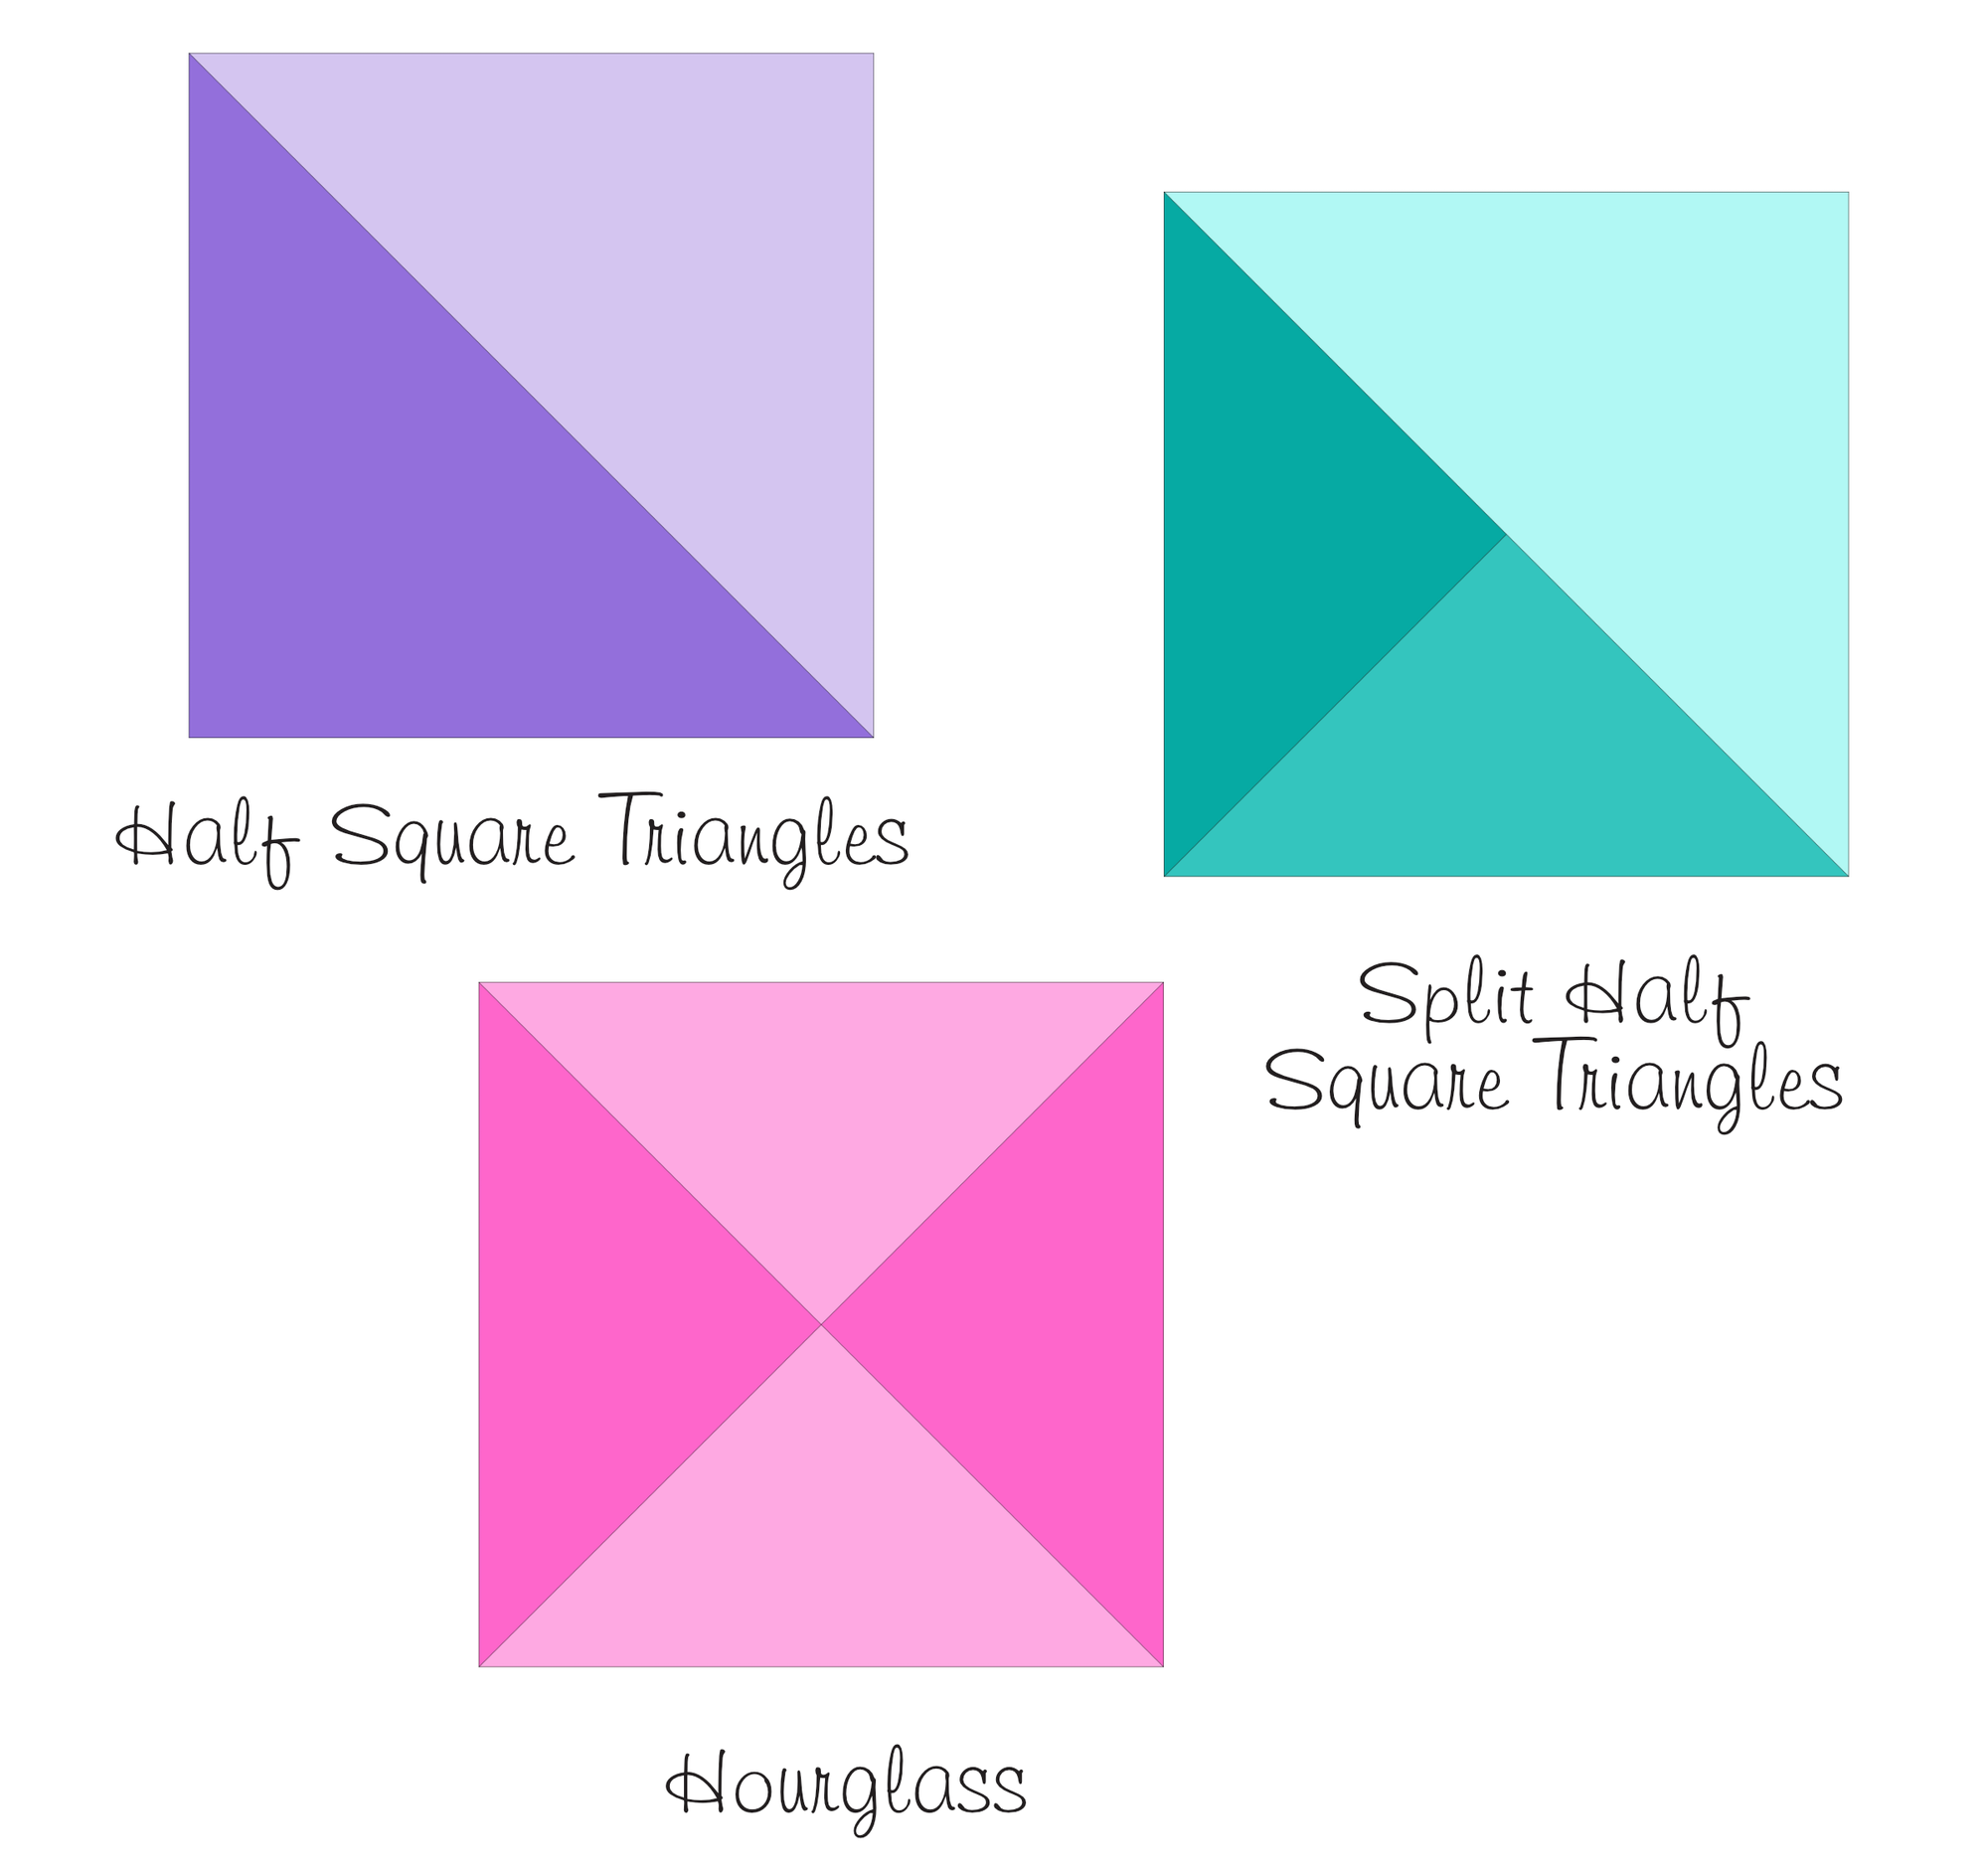 triangles in squares paper pieced pattern including half square triangle, split half square triangle and hourglass